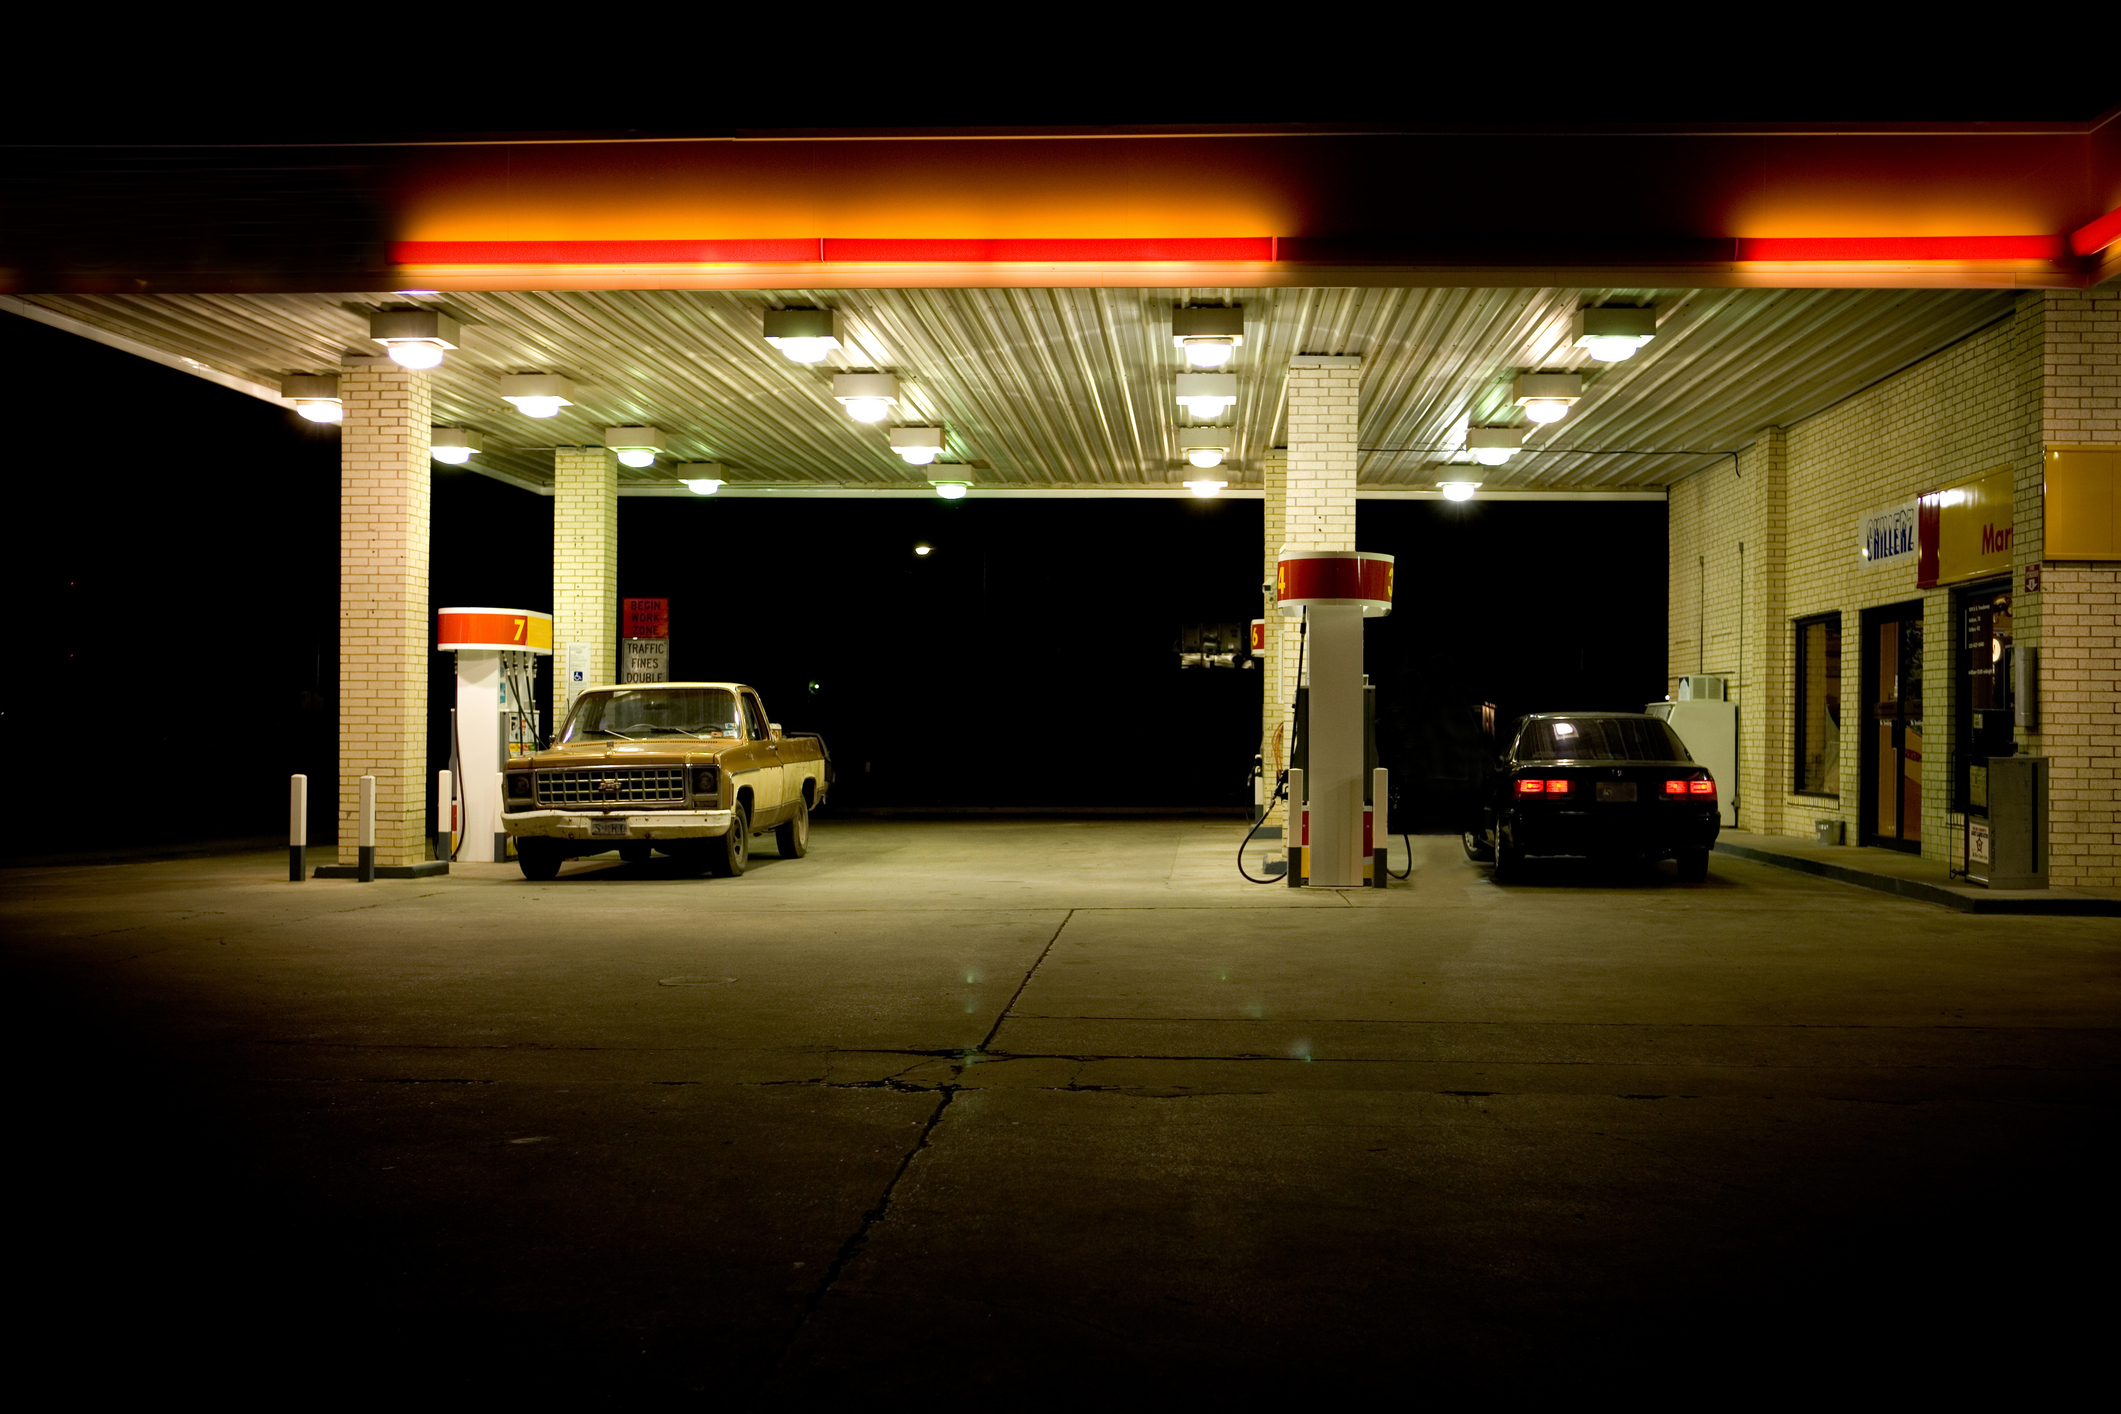 A gas station at night with illuminated canopy, two cars parked by the pumps